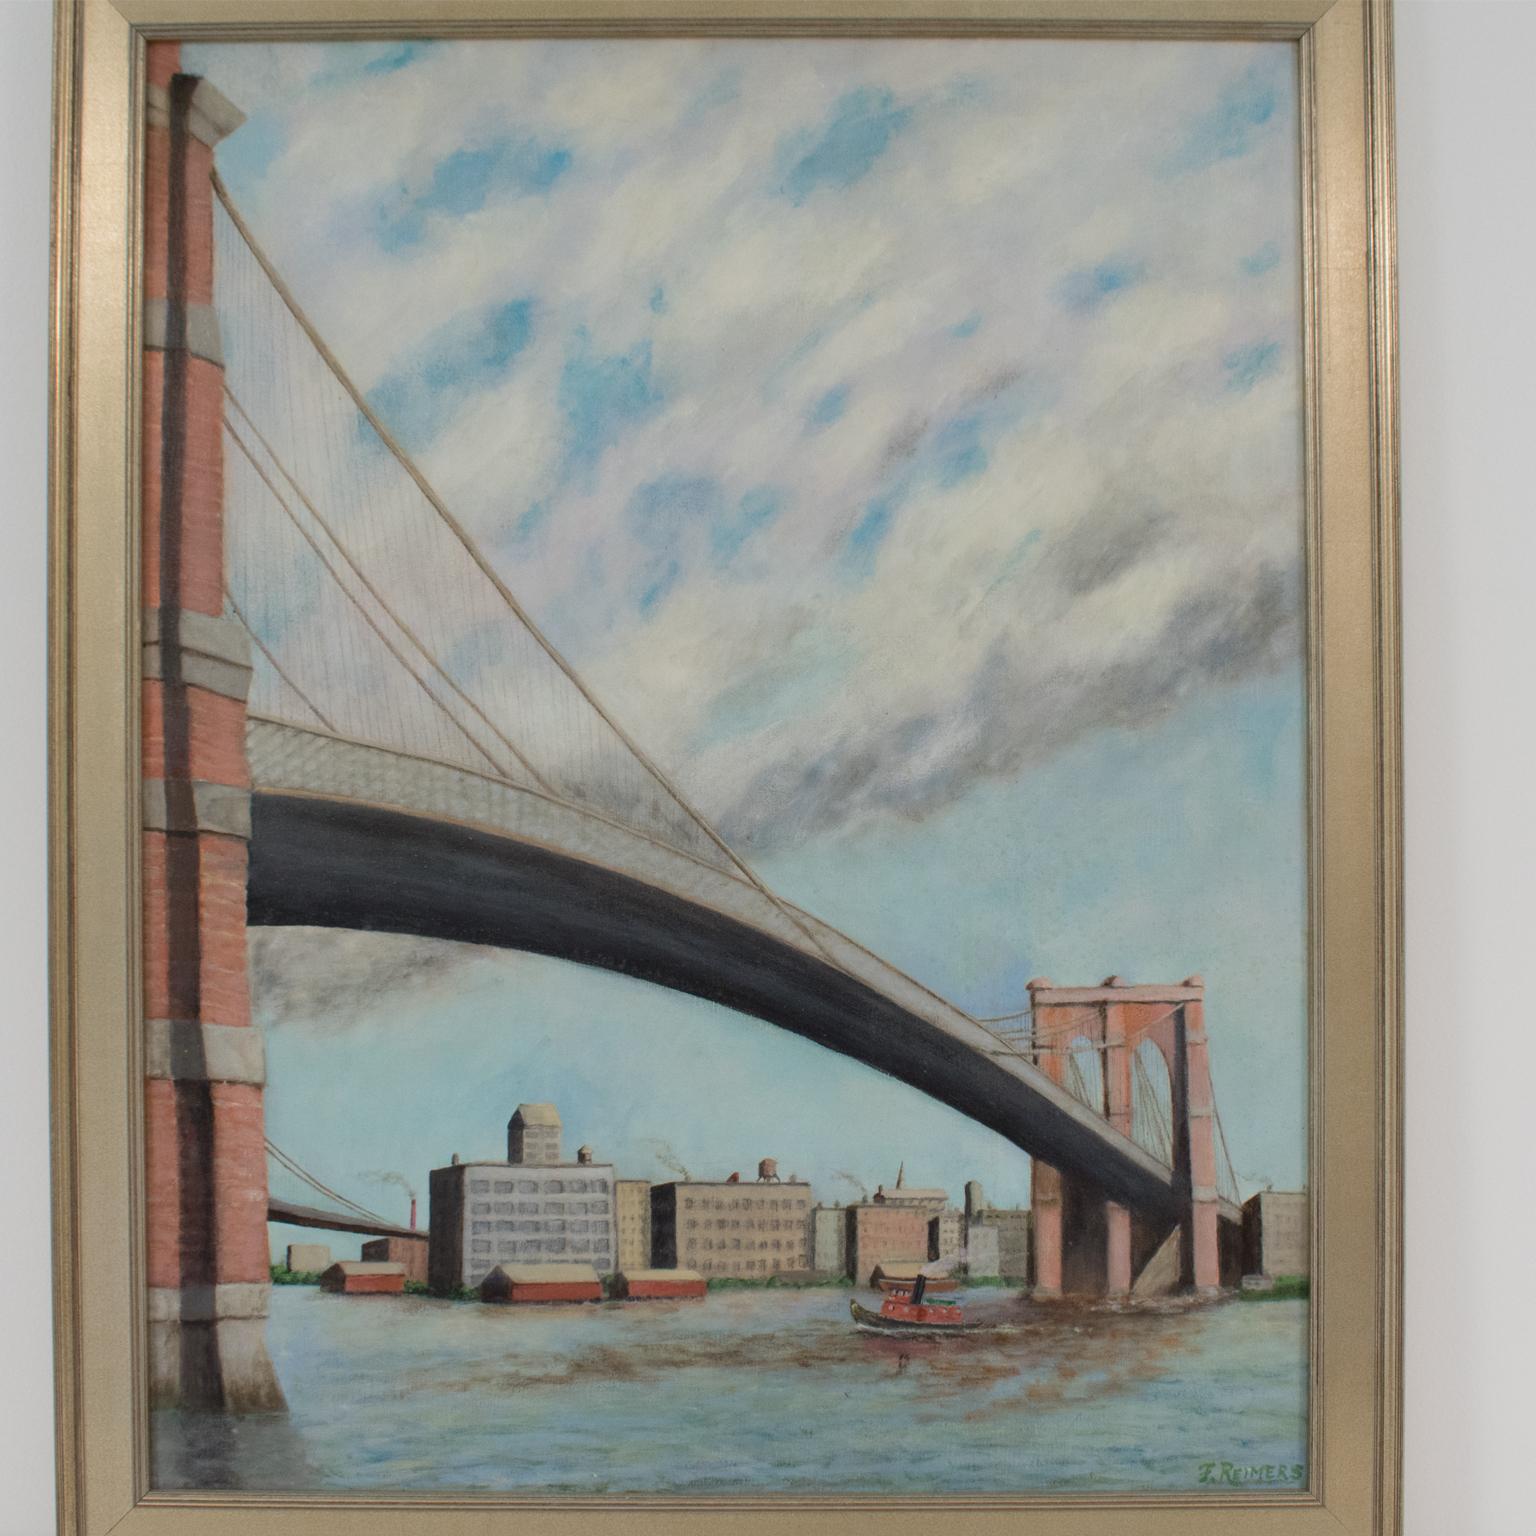 Brooklyn Transfer East River Crossing, Oil on Canvas Painting Frederick Reimers - Gray Landscape Painting by Frederick E. Reimers